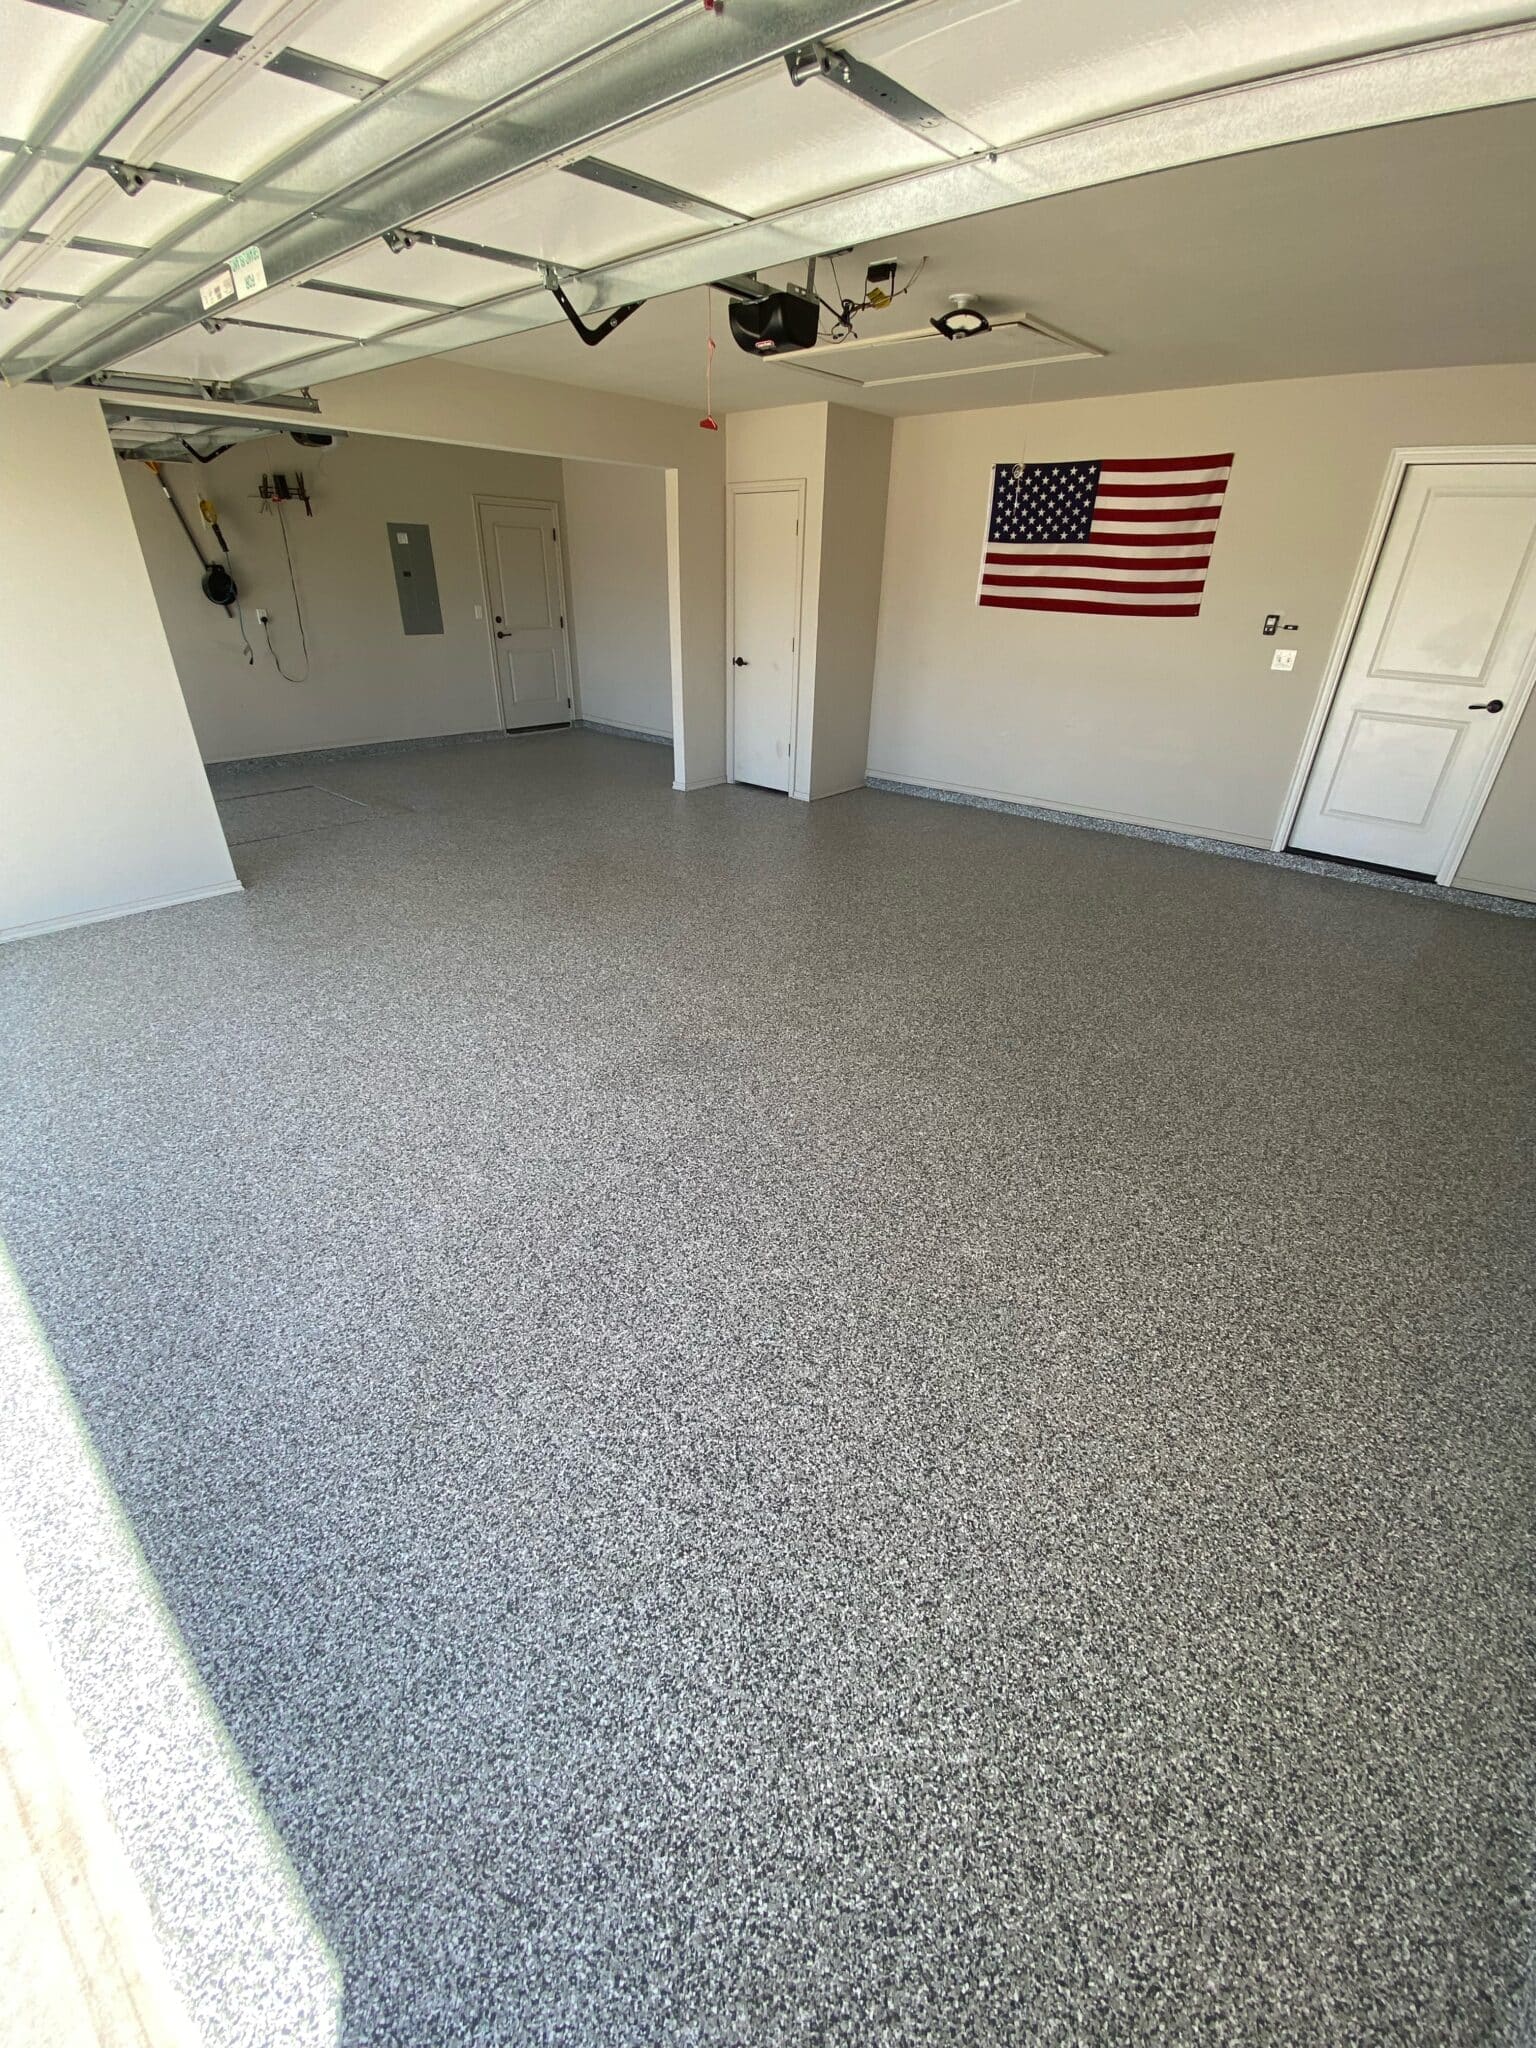 completed garage with concrete floor coating